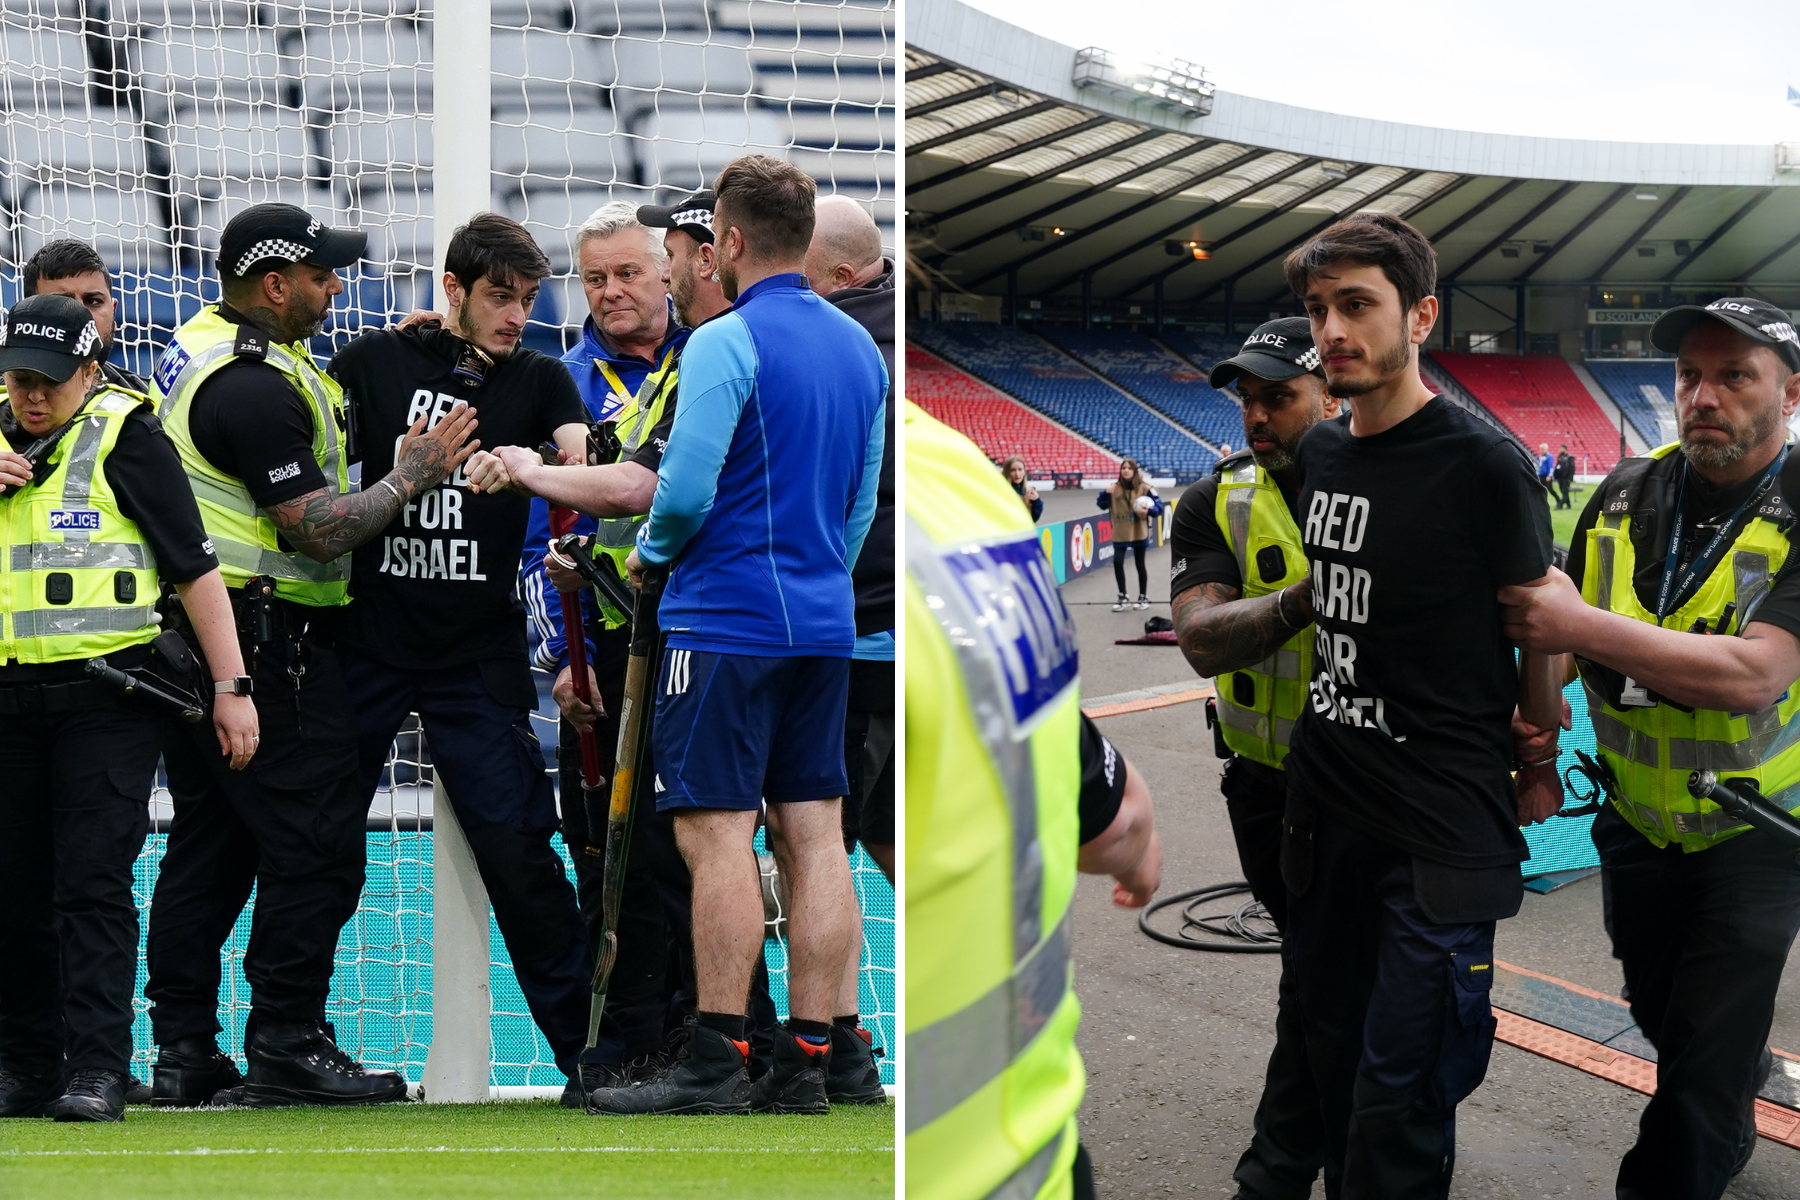 Scotland vs Israel delayed after protestor chained to posts